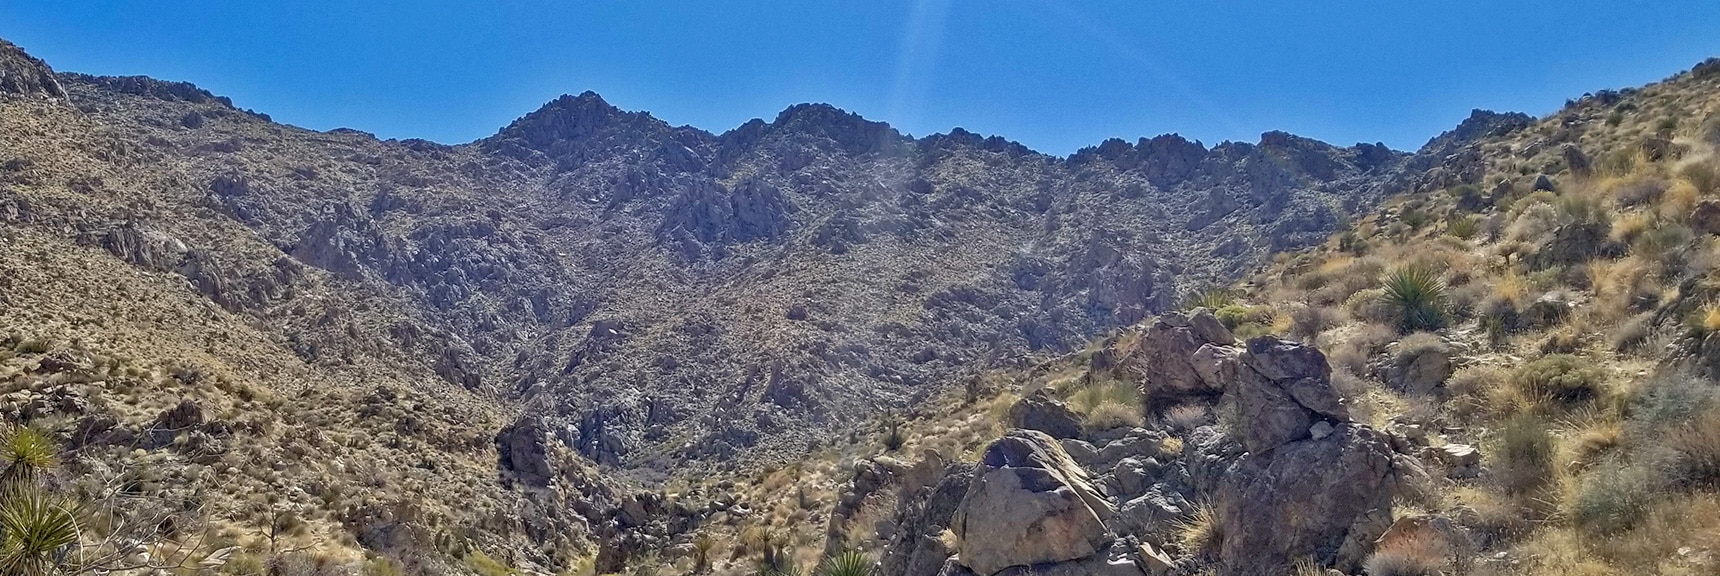 Mt. Wilson and Summit Approach Ridge to the Right. | Horse Thief Canyon Loop | Mt. Wilson | Black Mountains | Lake Mead National Recreation Area, Arizona